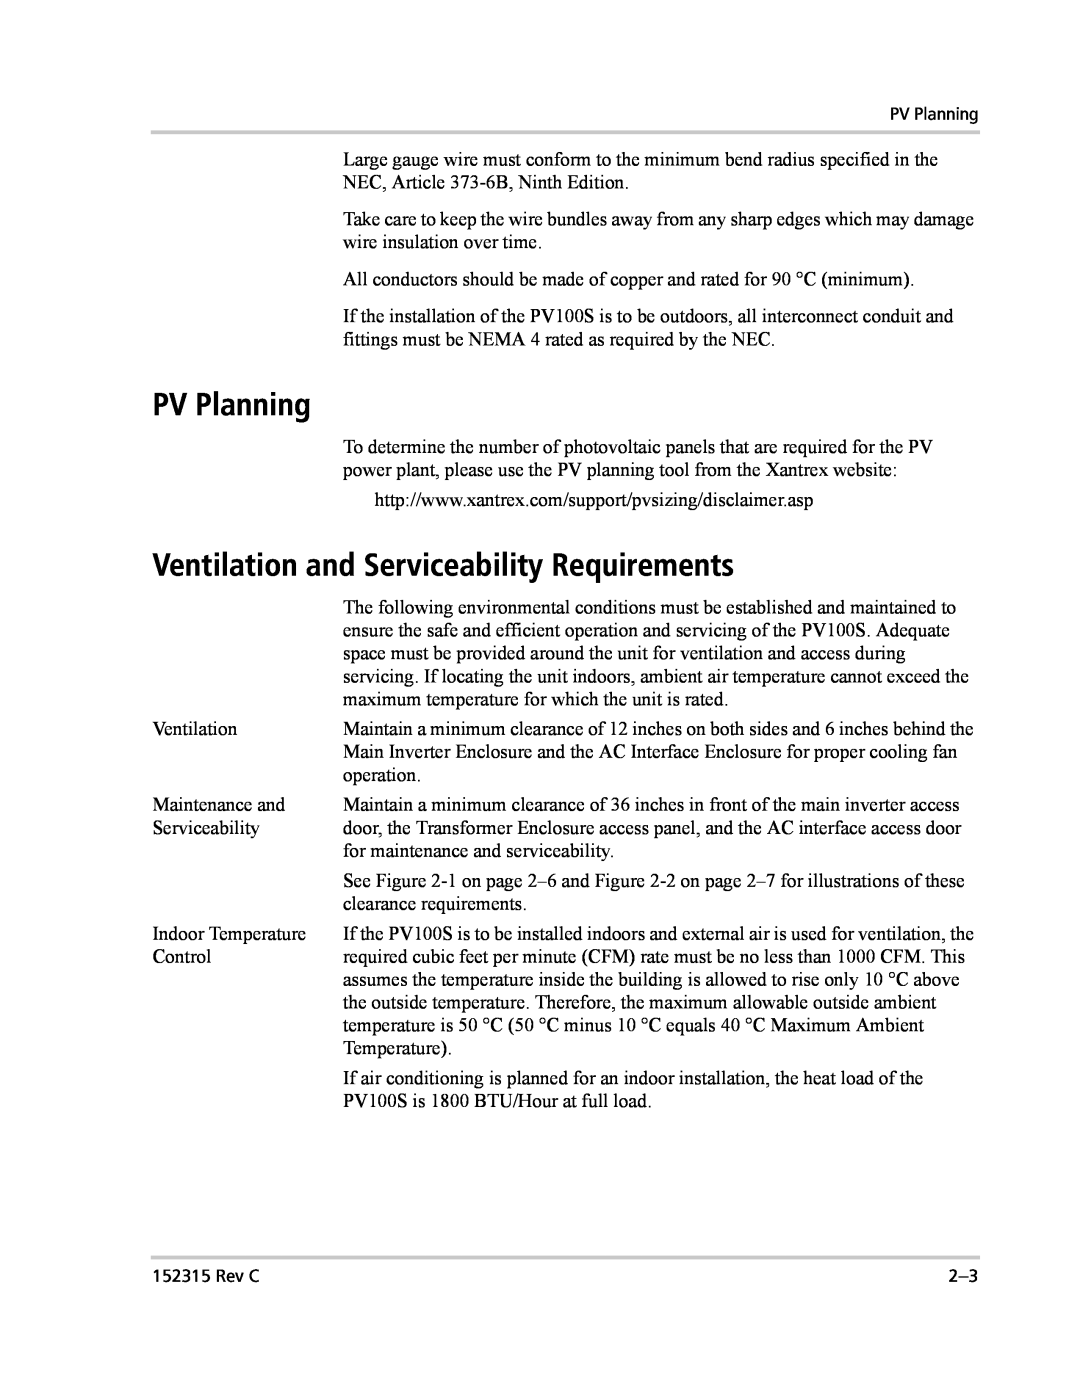 Xantrex Technology PV100S-480 installation manual PV Planning, Ventilation and Serviceability Requirements 